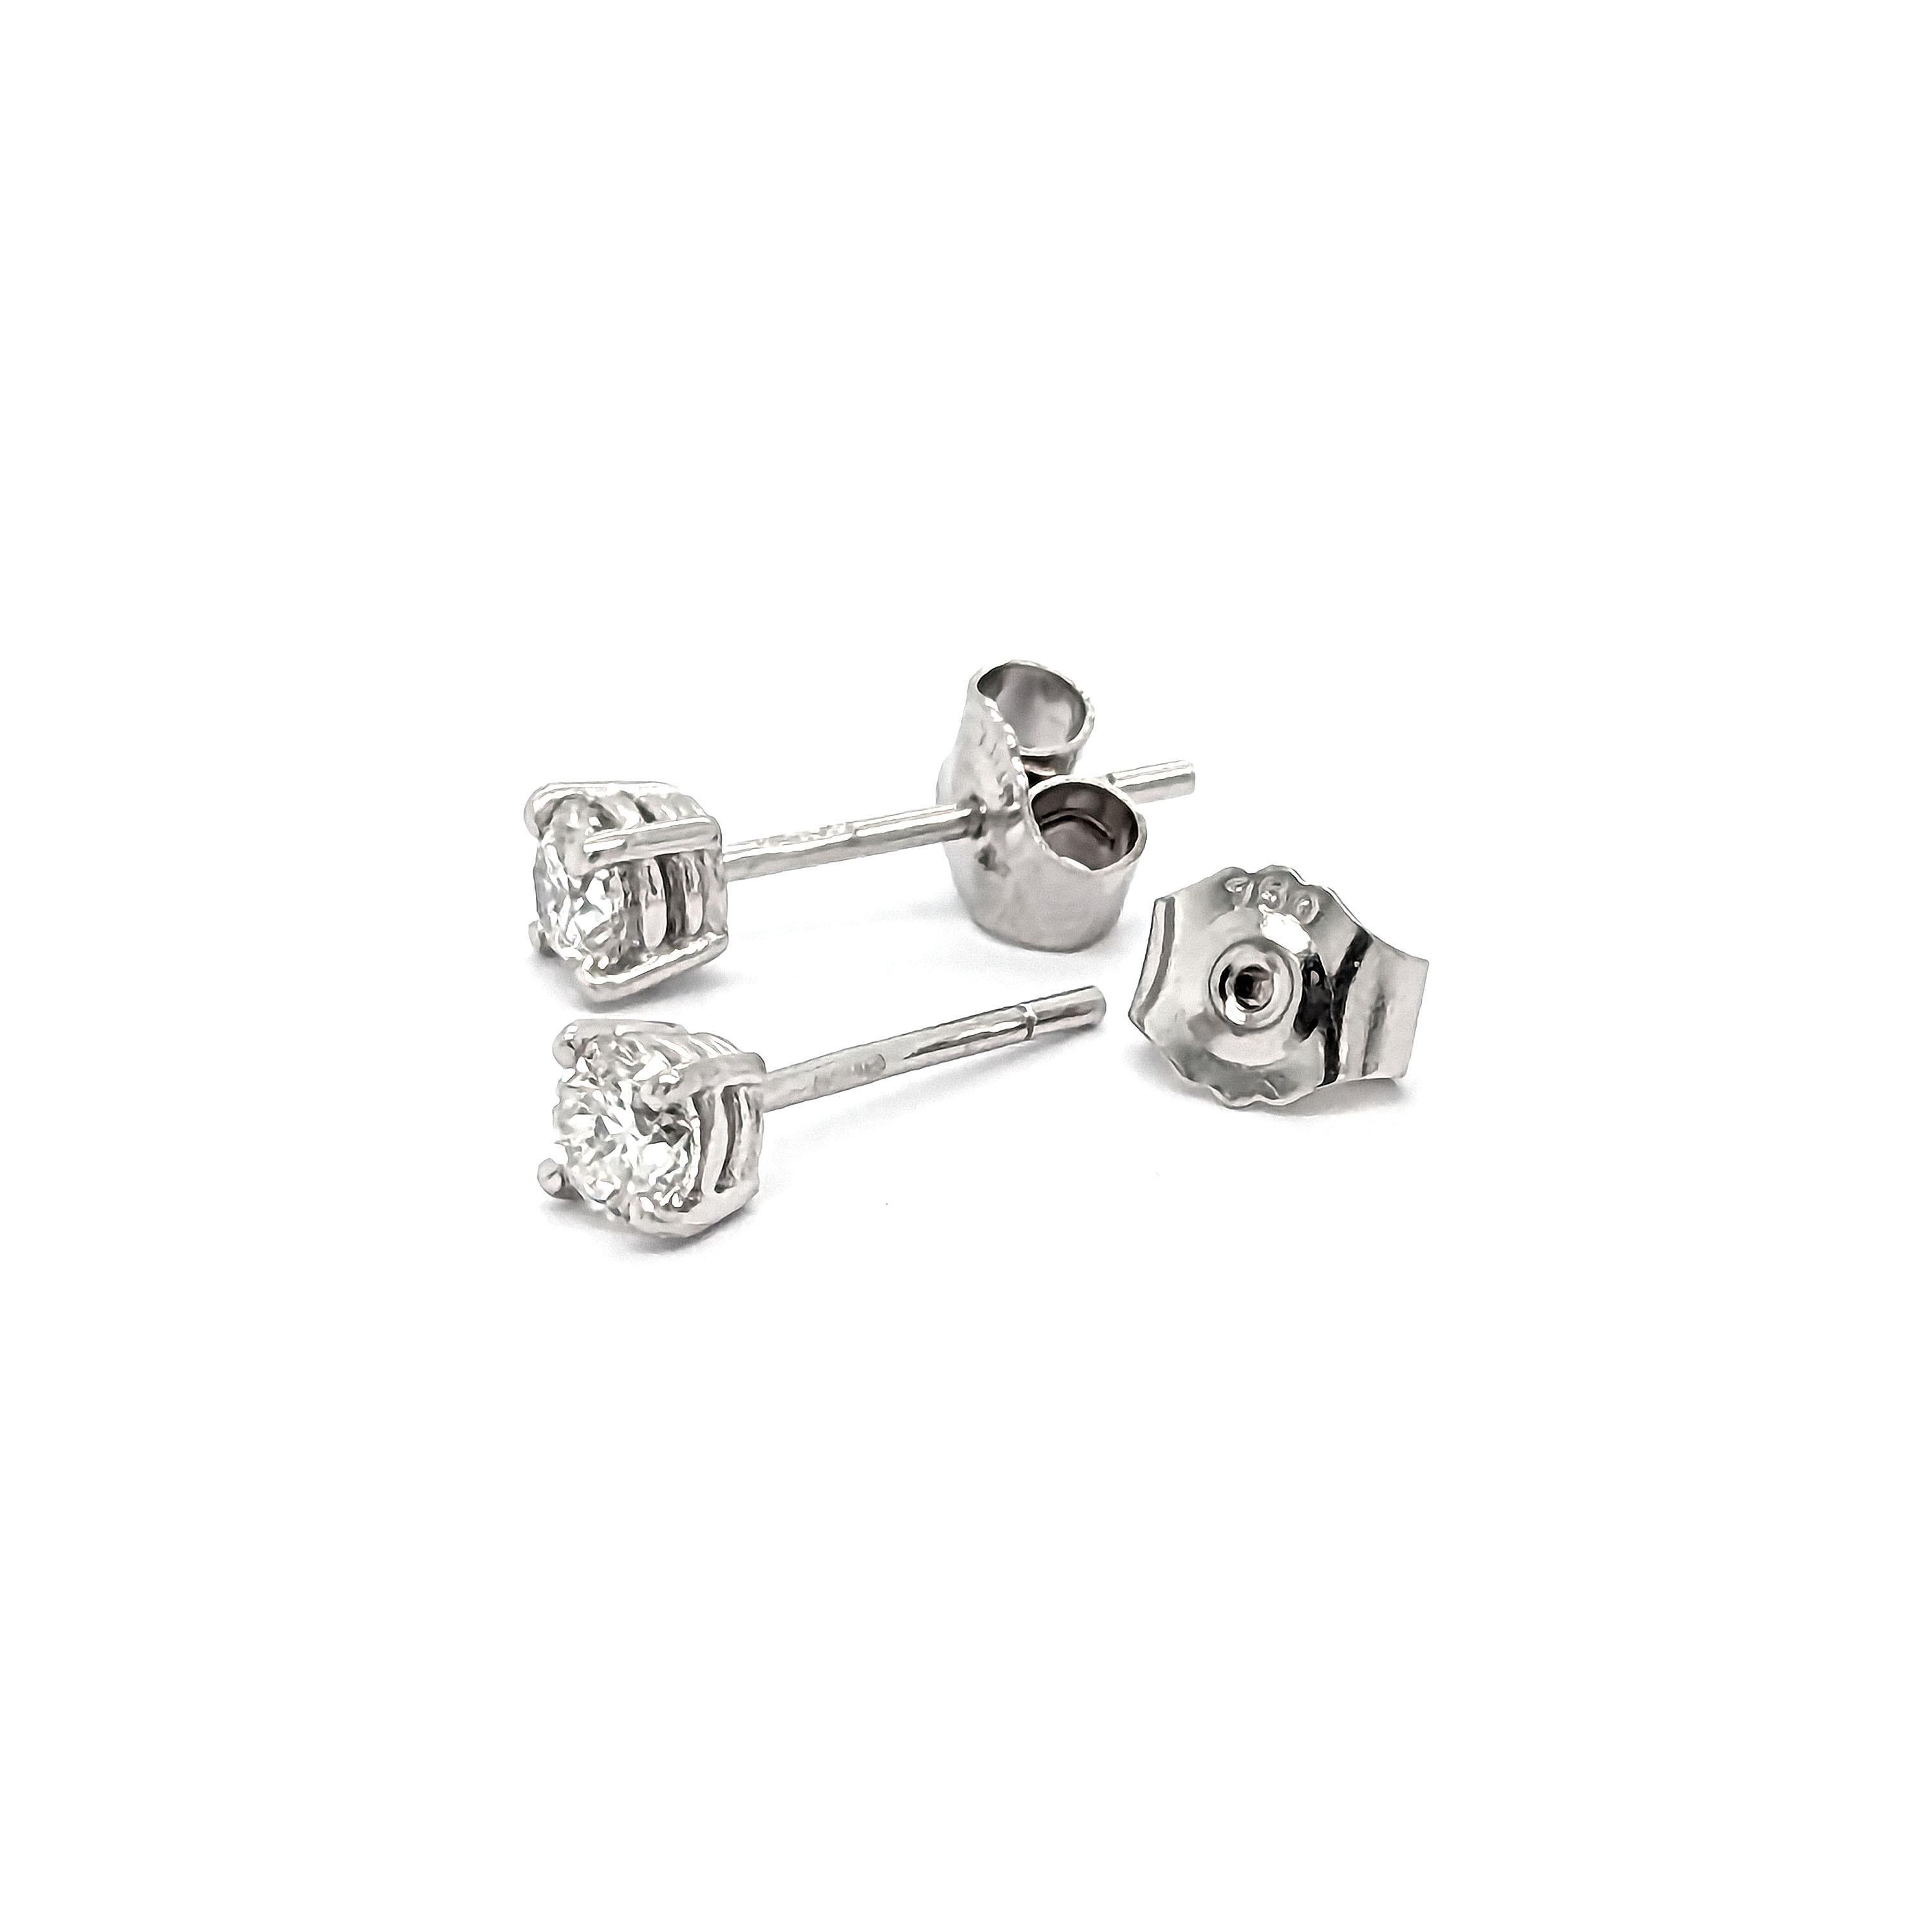 Women's Modern Diamond And White Gold Stud Earrings, 0.52 Carats For Sale